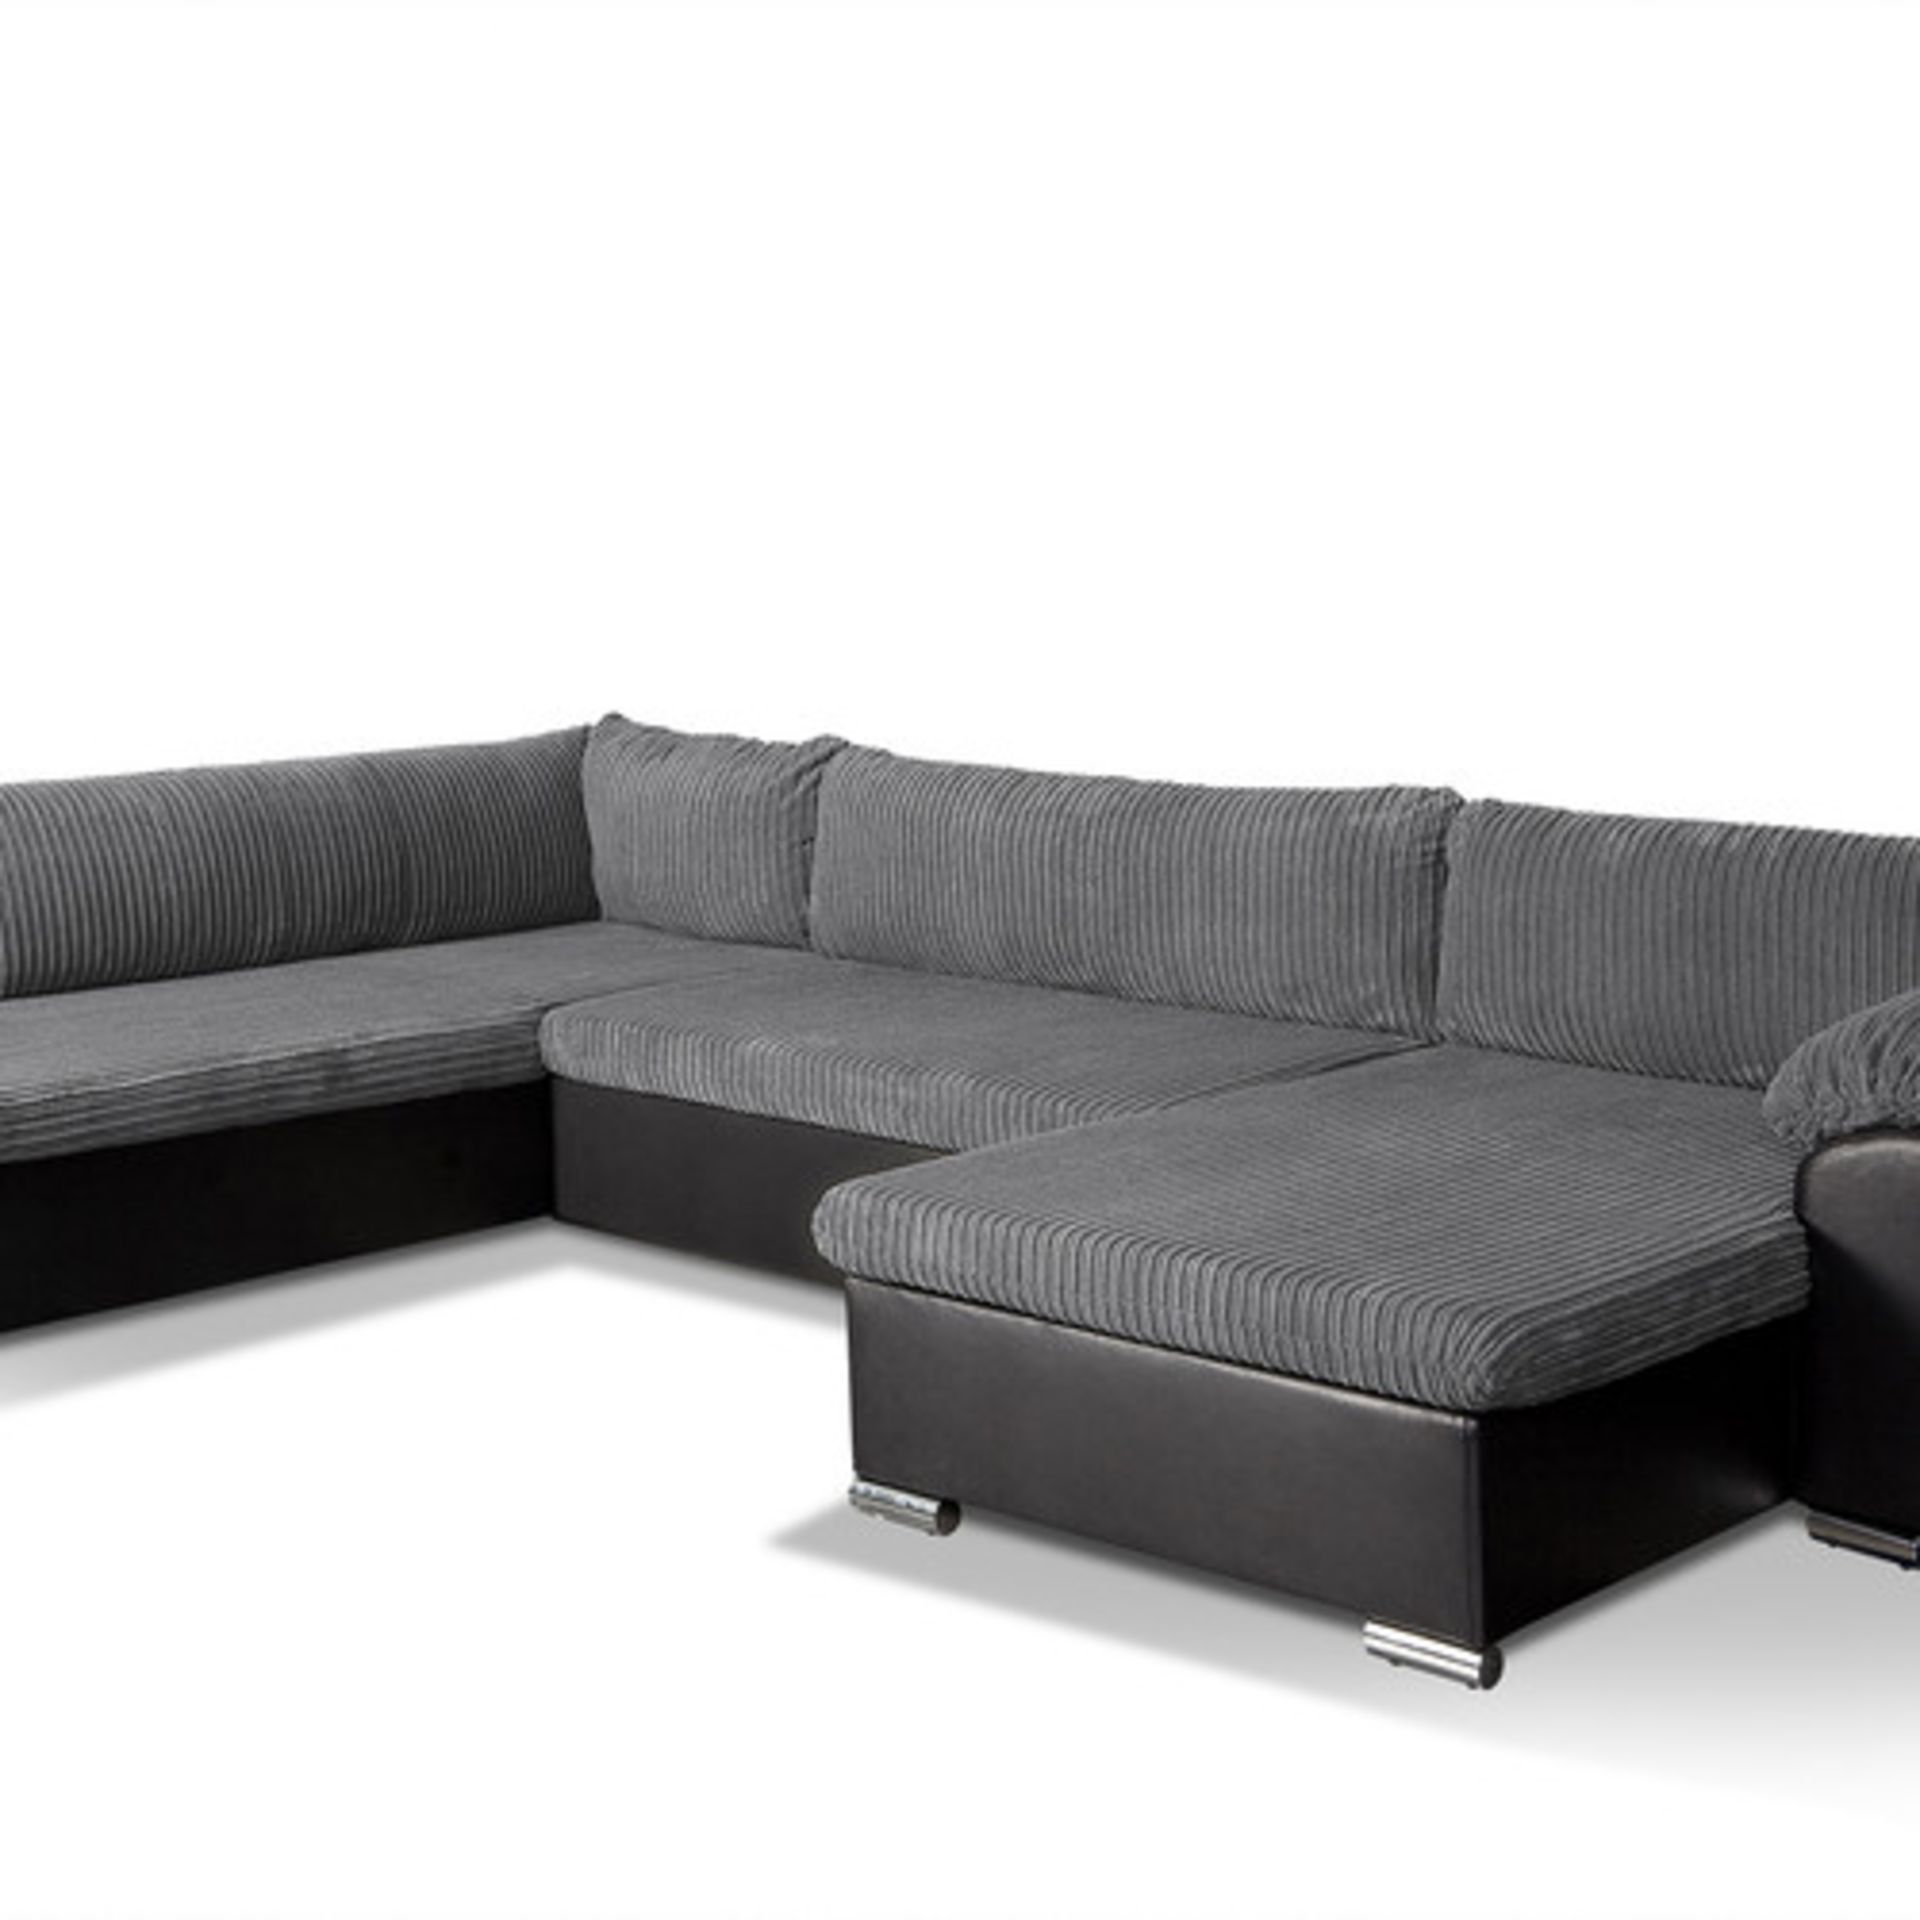 Salerno left hand facing large corner sofa bed in jumbo charcoal and viper black - Image 2 of 2